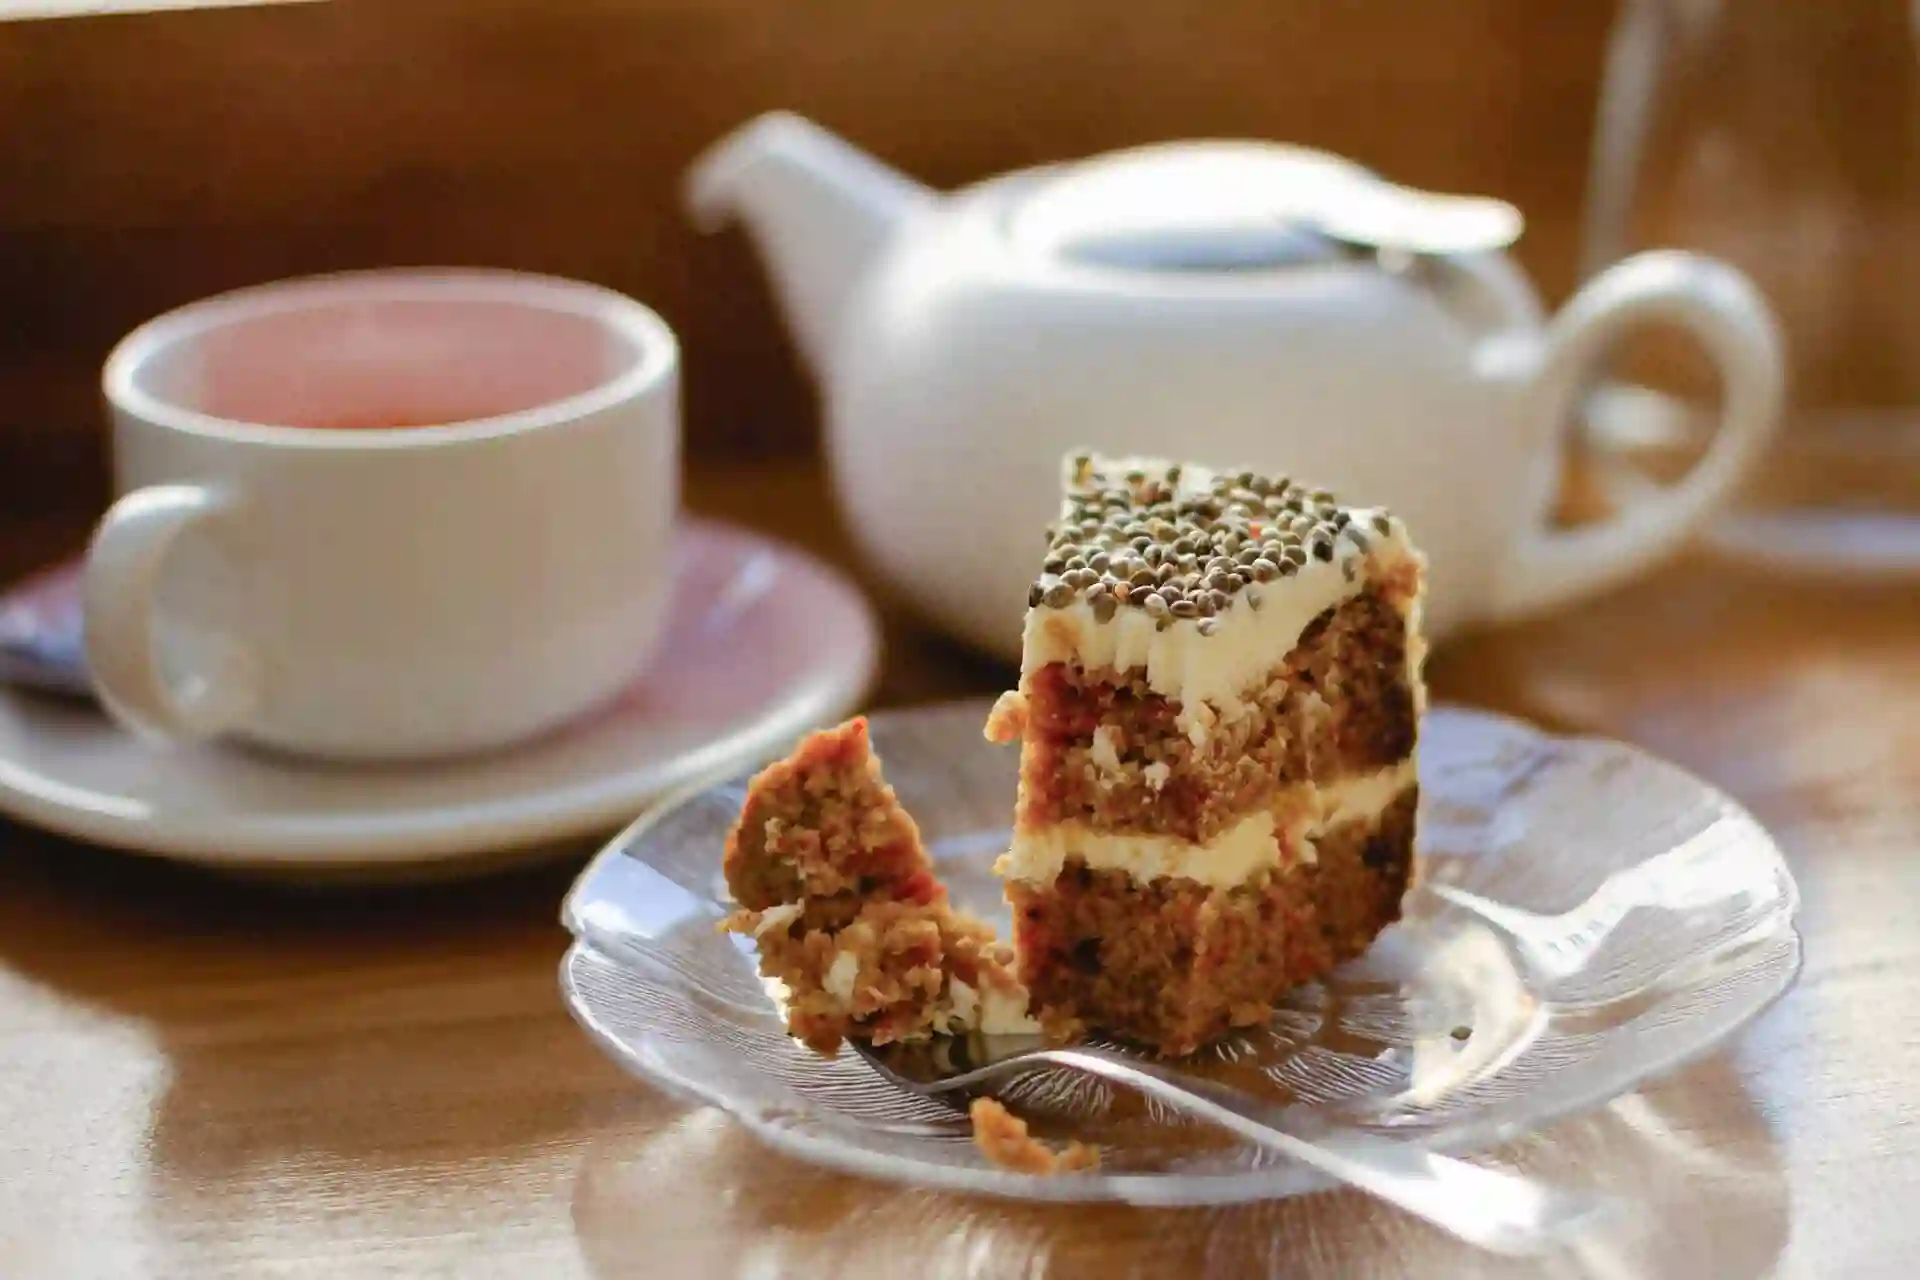 A cup of tea and a slice of cake